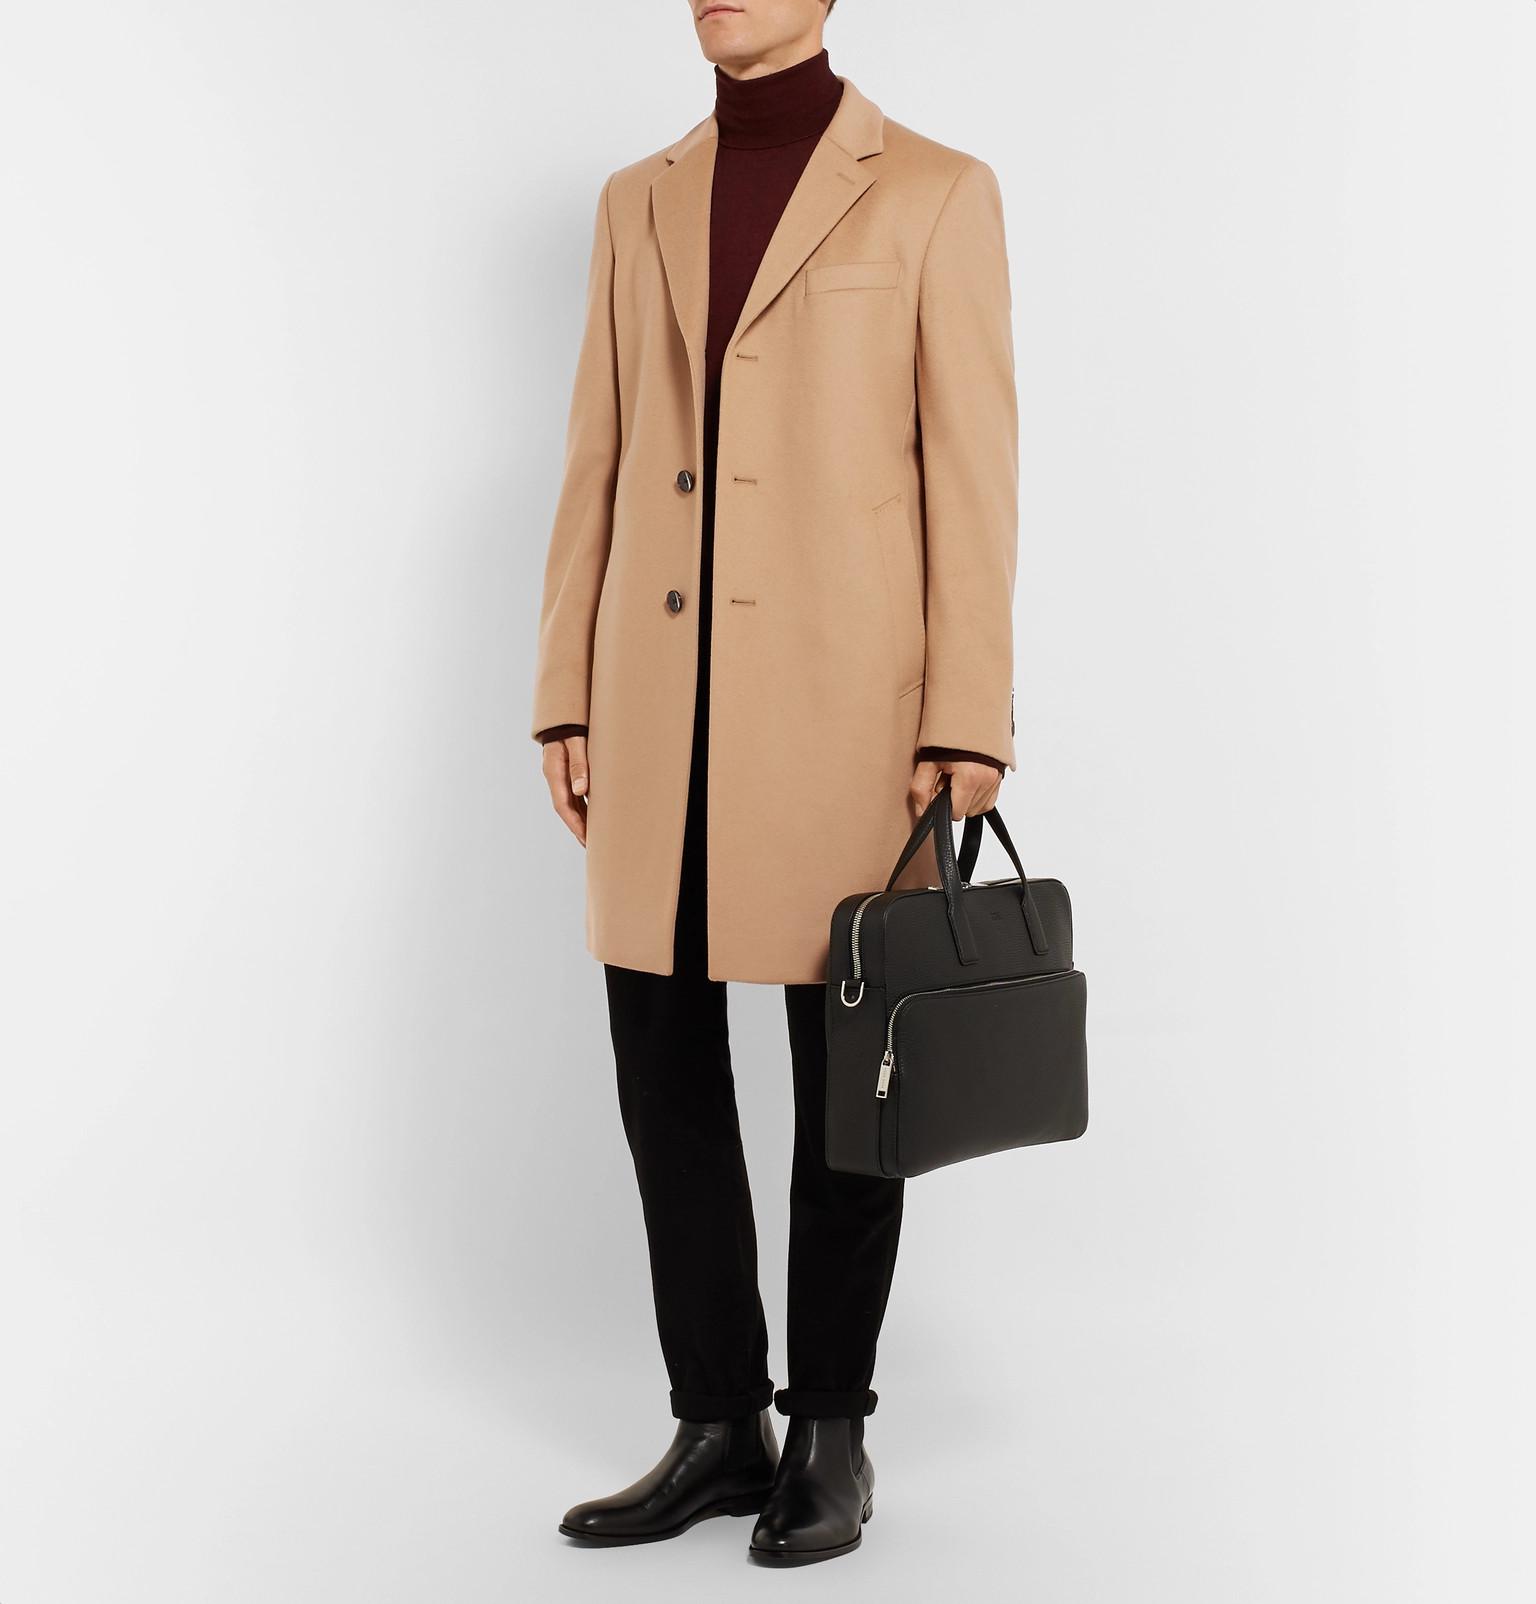 BOSS by HUGO BOSS Virgin Wool And Cashmere-blend Coat in Camel (Natural)  for Men - Lyst